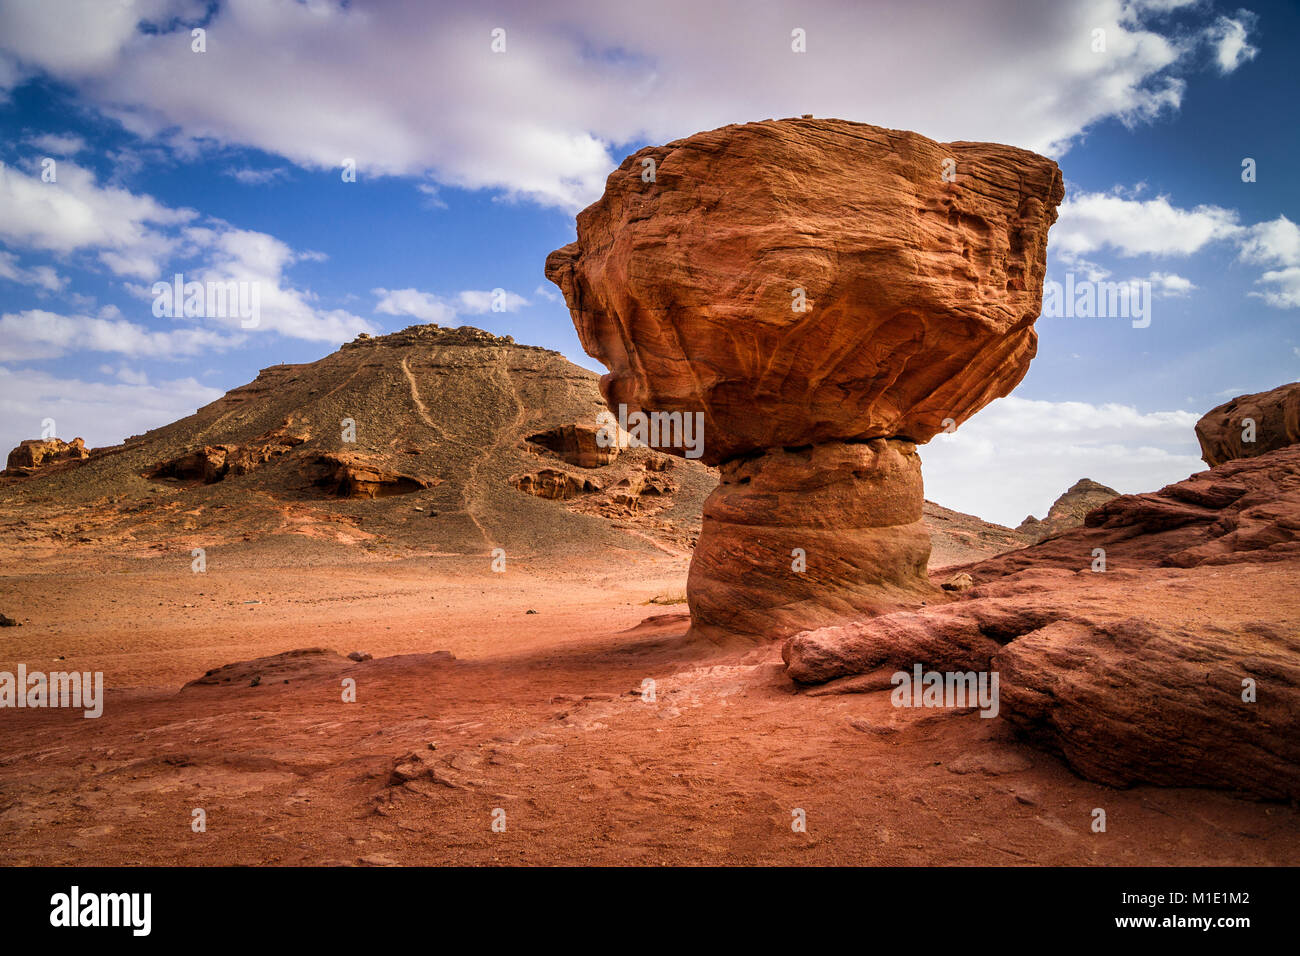 Geological rock formation called mushroom in Timna park in Negev desert, Eilat, Israel. Winter sunny day with fluffy clouds. Stock Photo